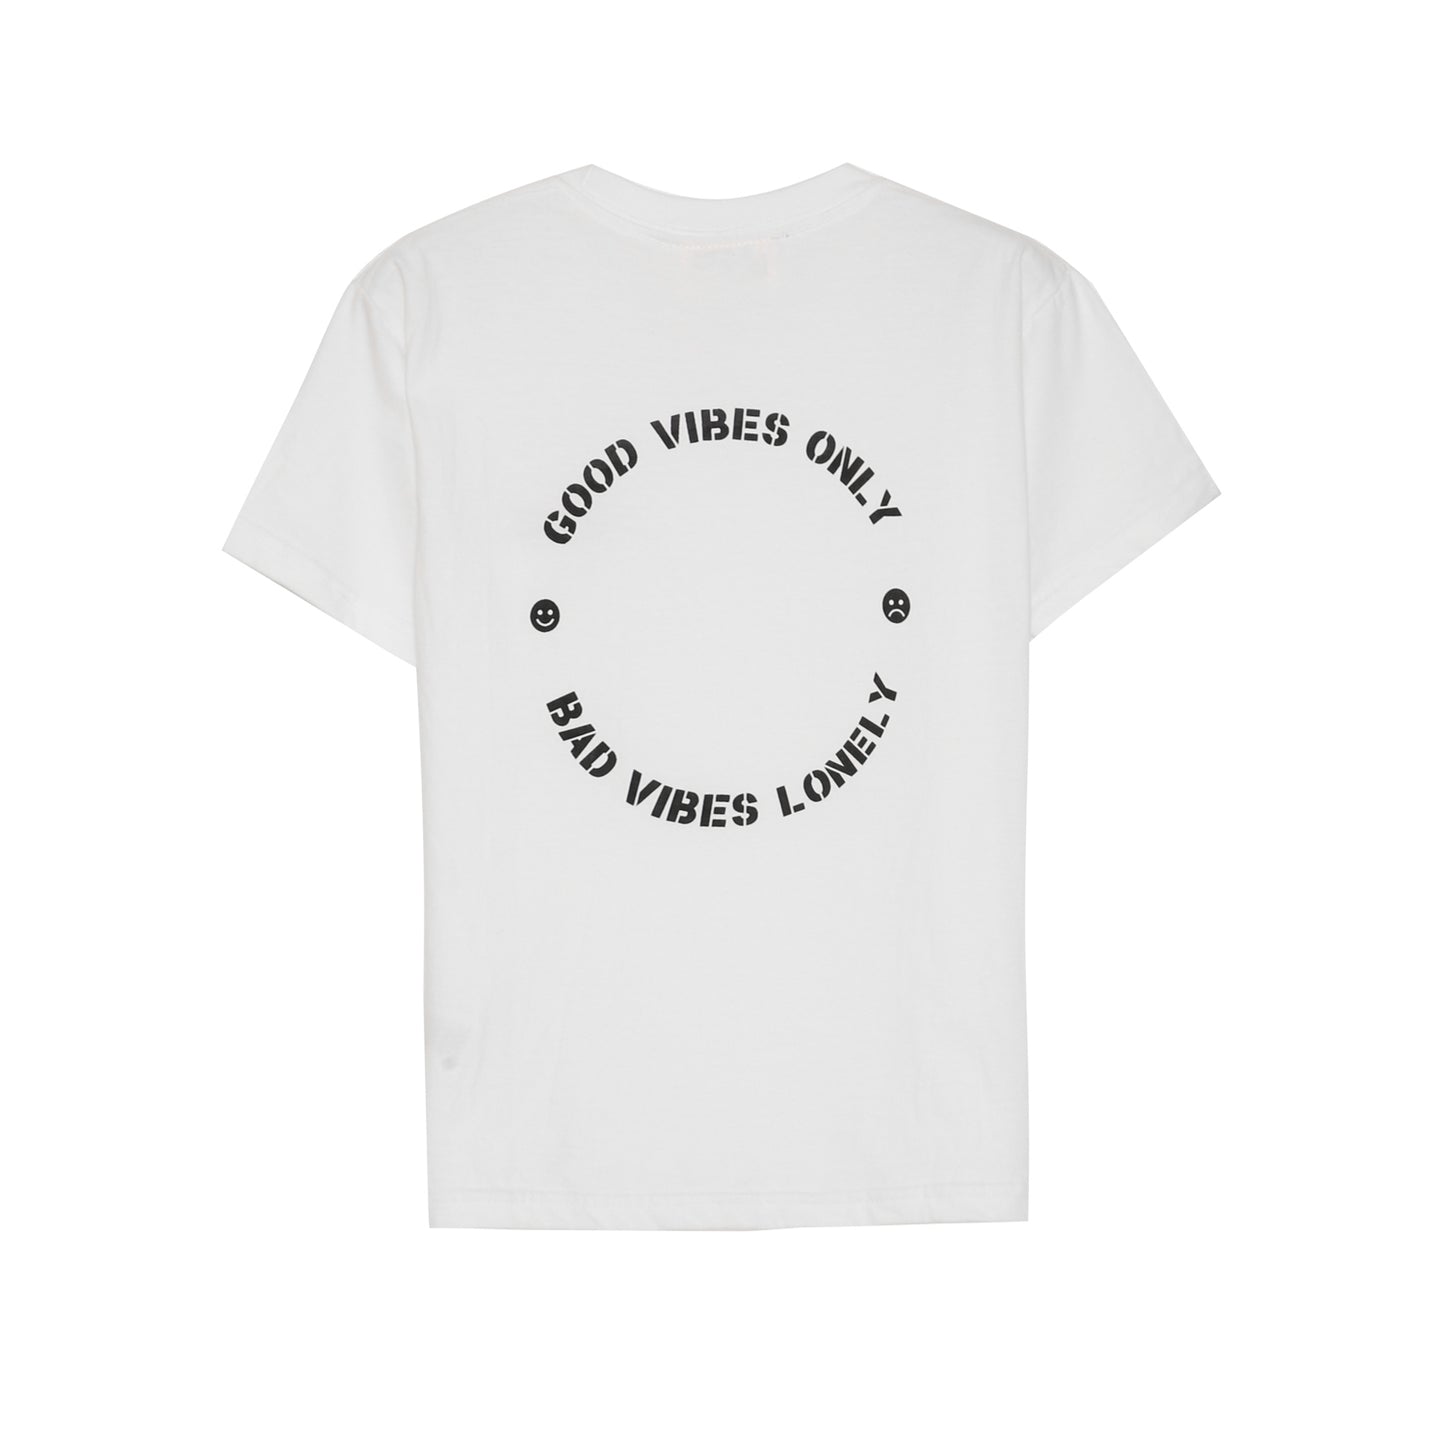 Aly Good Vibes - Bad Vibes Lonely Tee (White) (Kid Size)